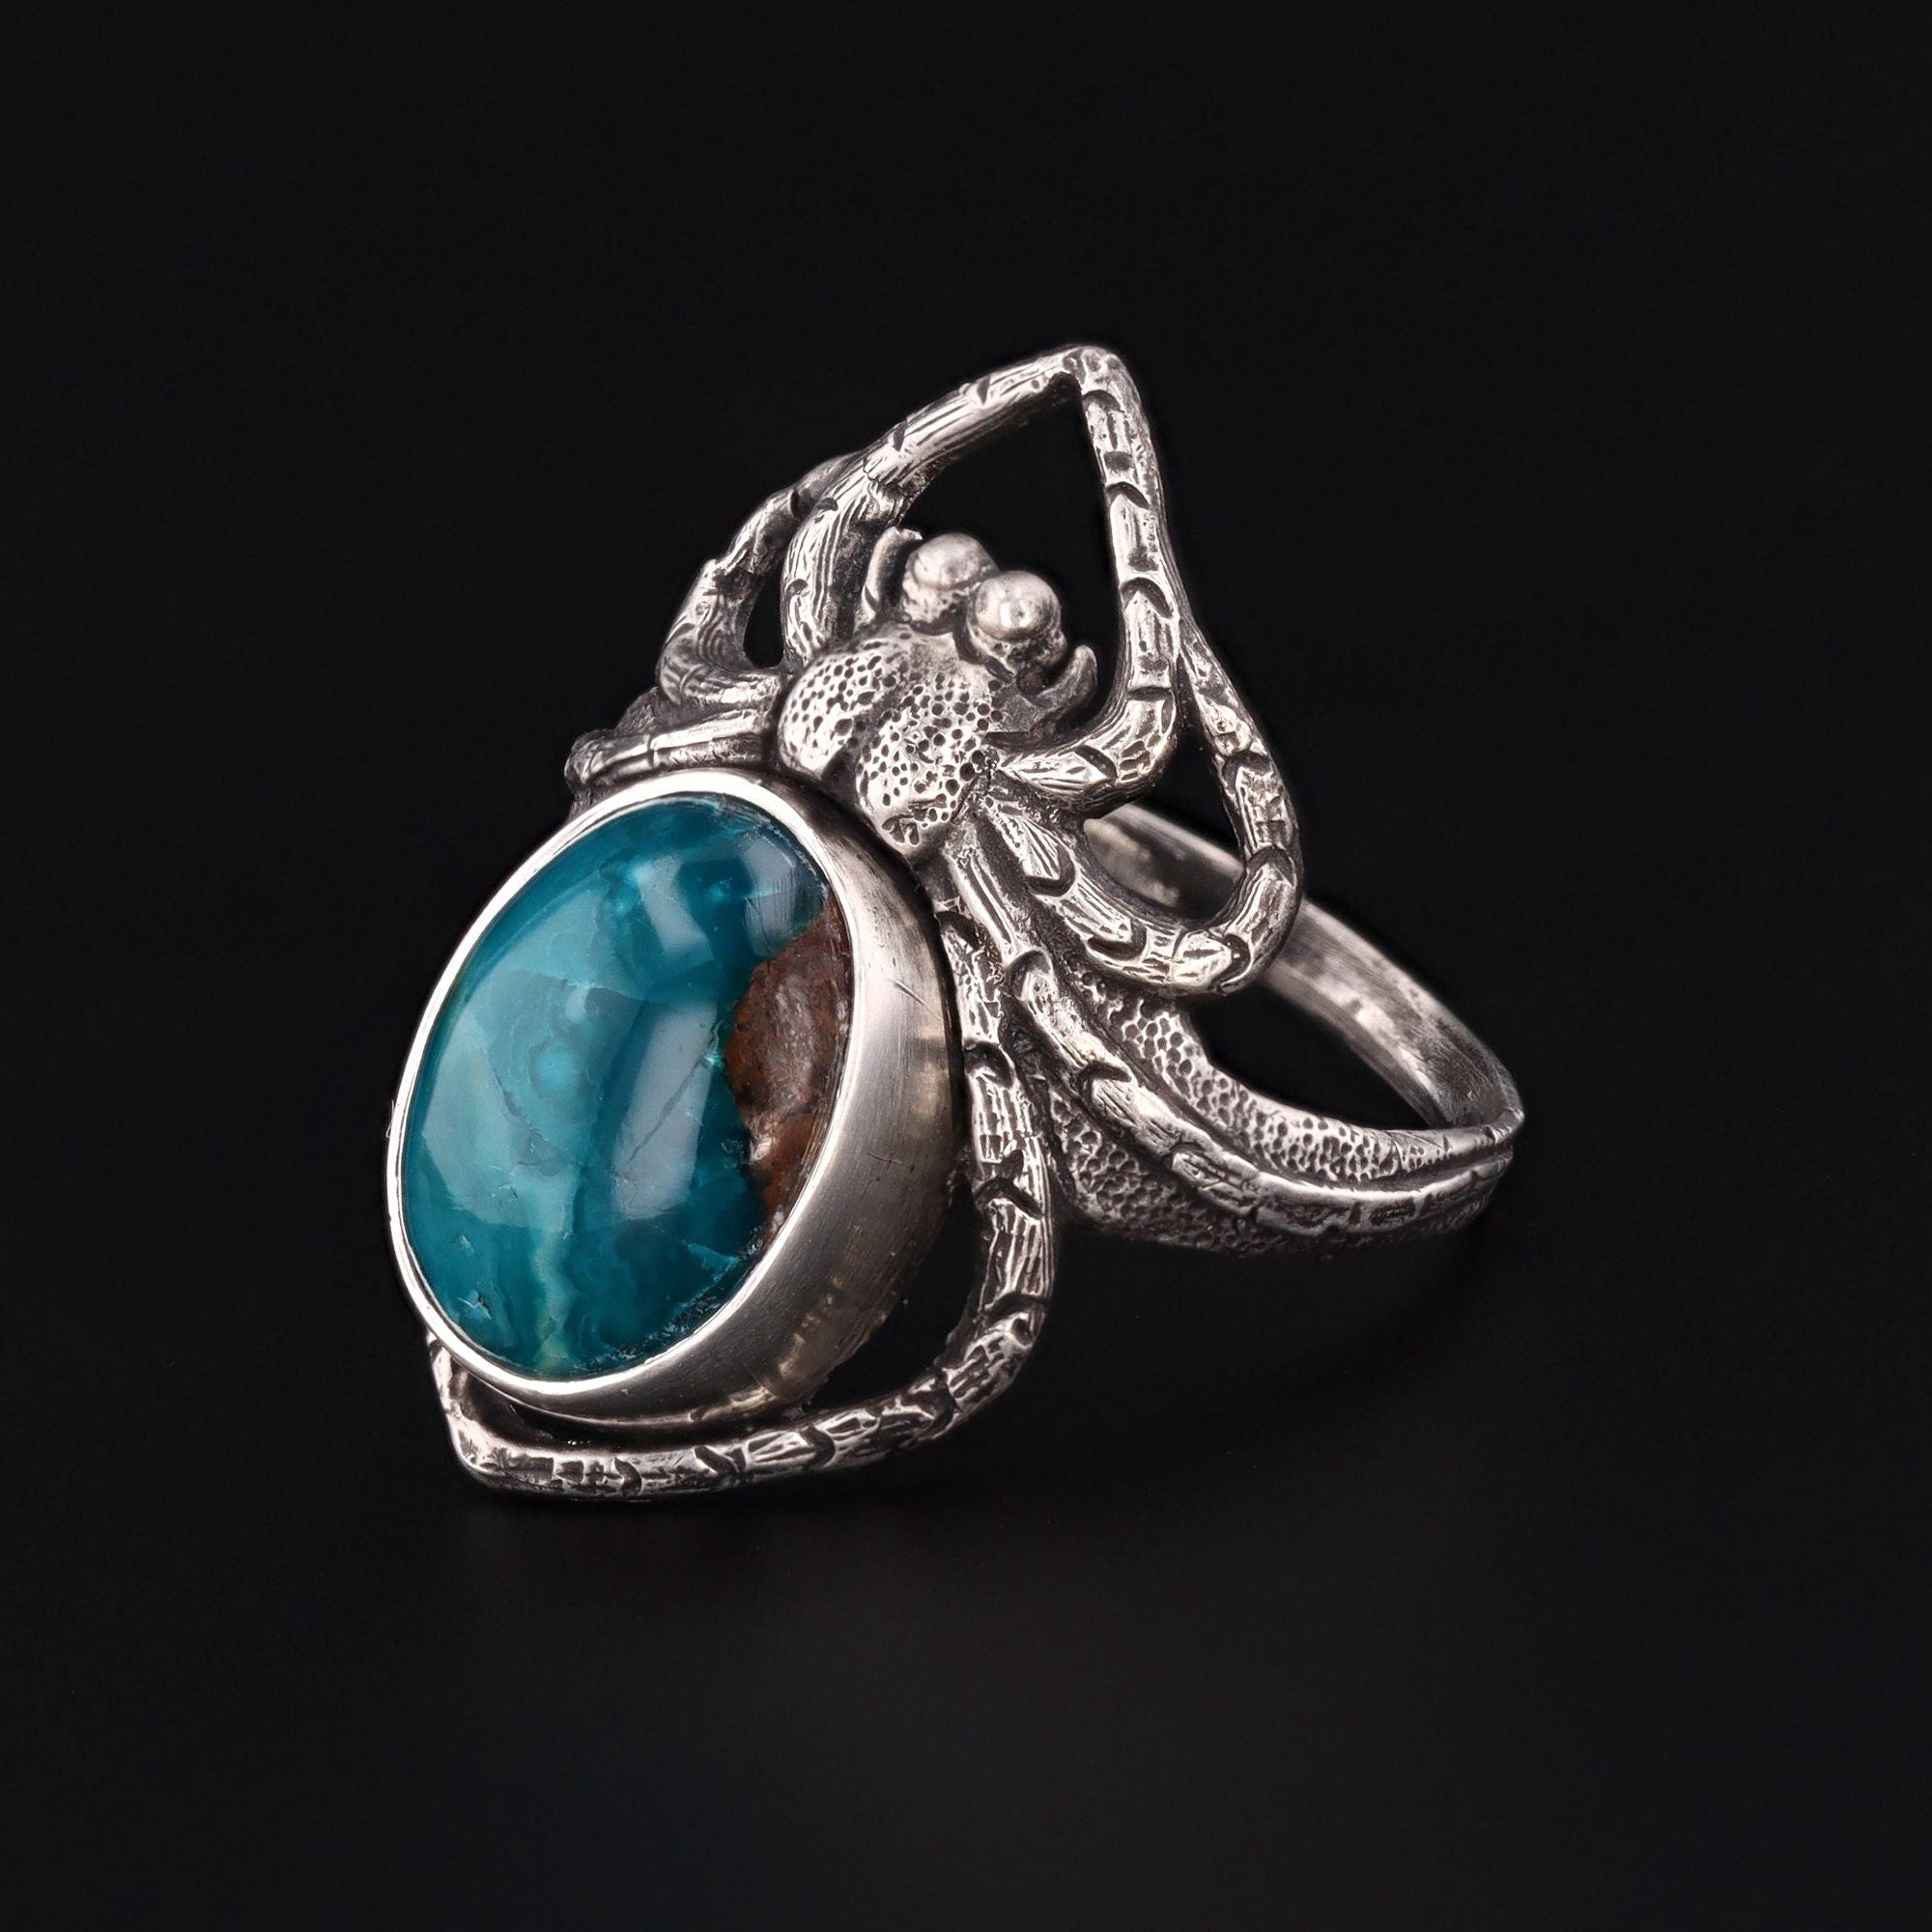 Spider Ring | Silver & Chrysocolla Spider Ring 